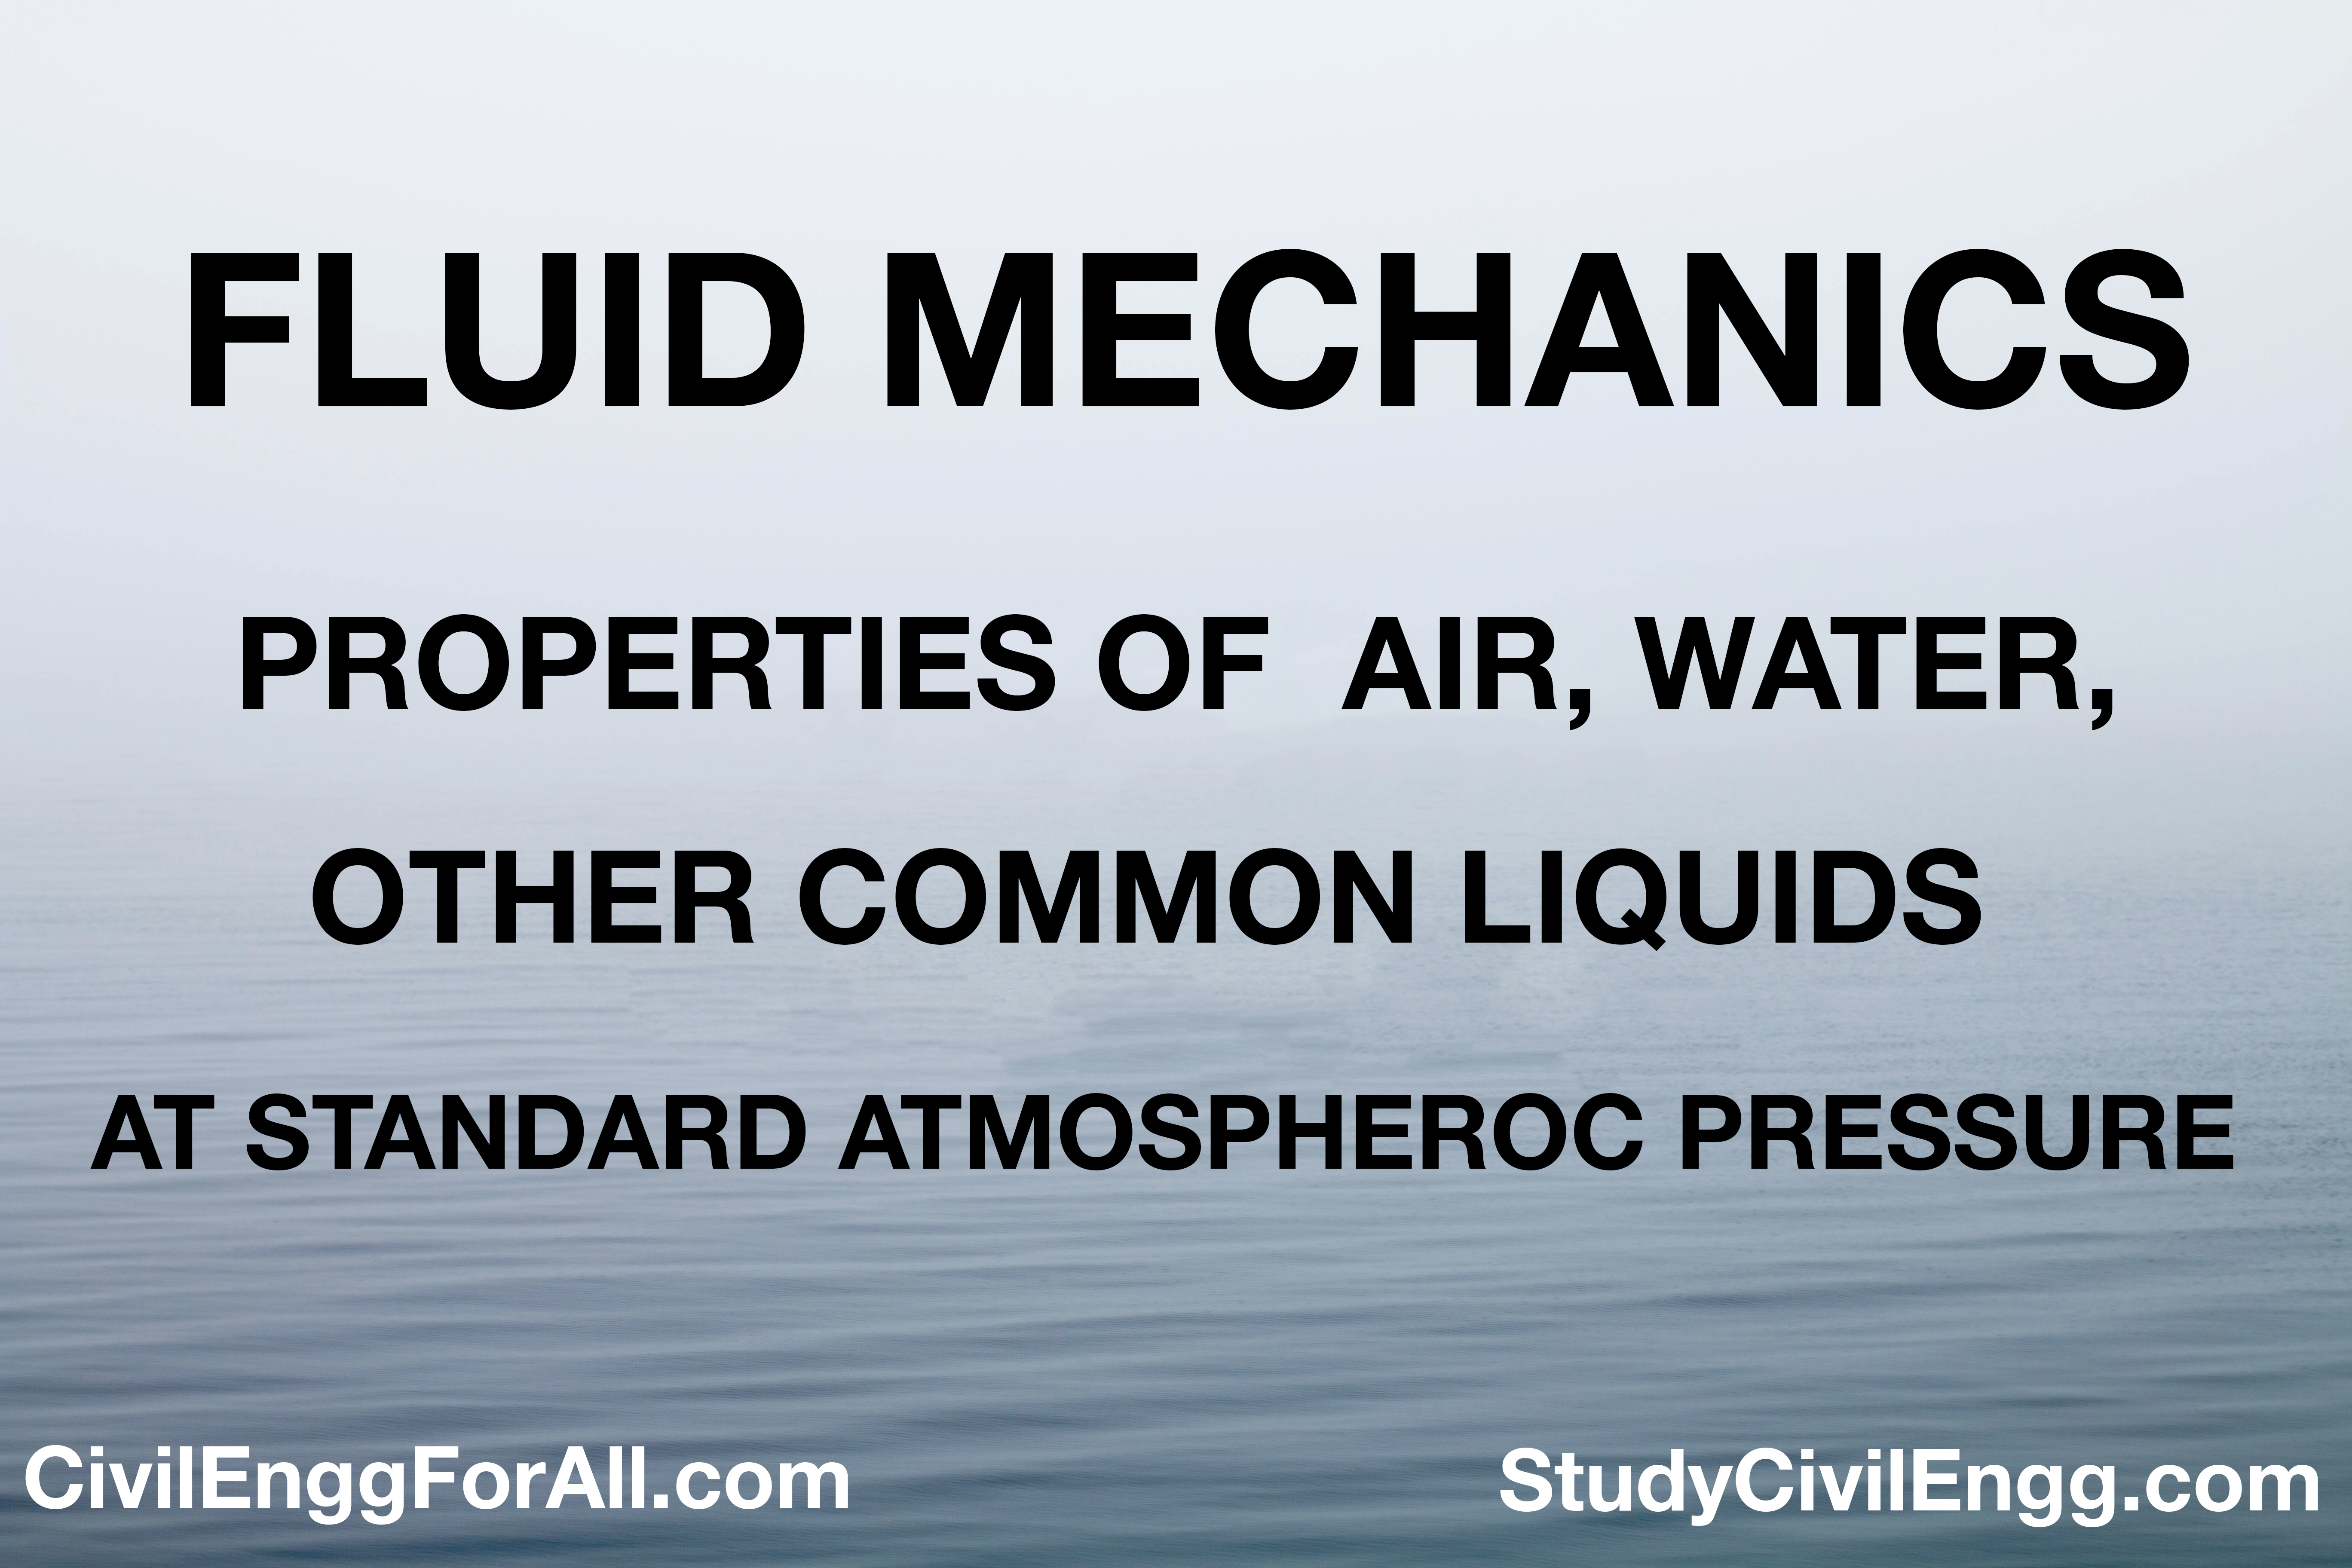 TABLES - PROPERTIES OF AIR, WATER AND OTHER COMMON LIQUIDS AT STANDARD ATMOSPHERIC PRESSURE - FLUID MECHANICS (StudyCivilEngg.com)